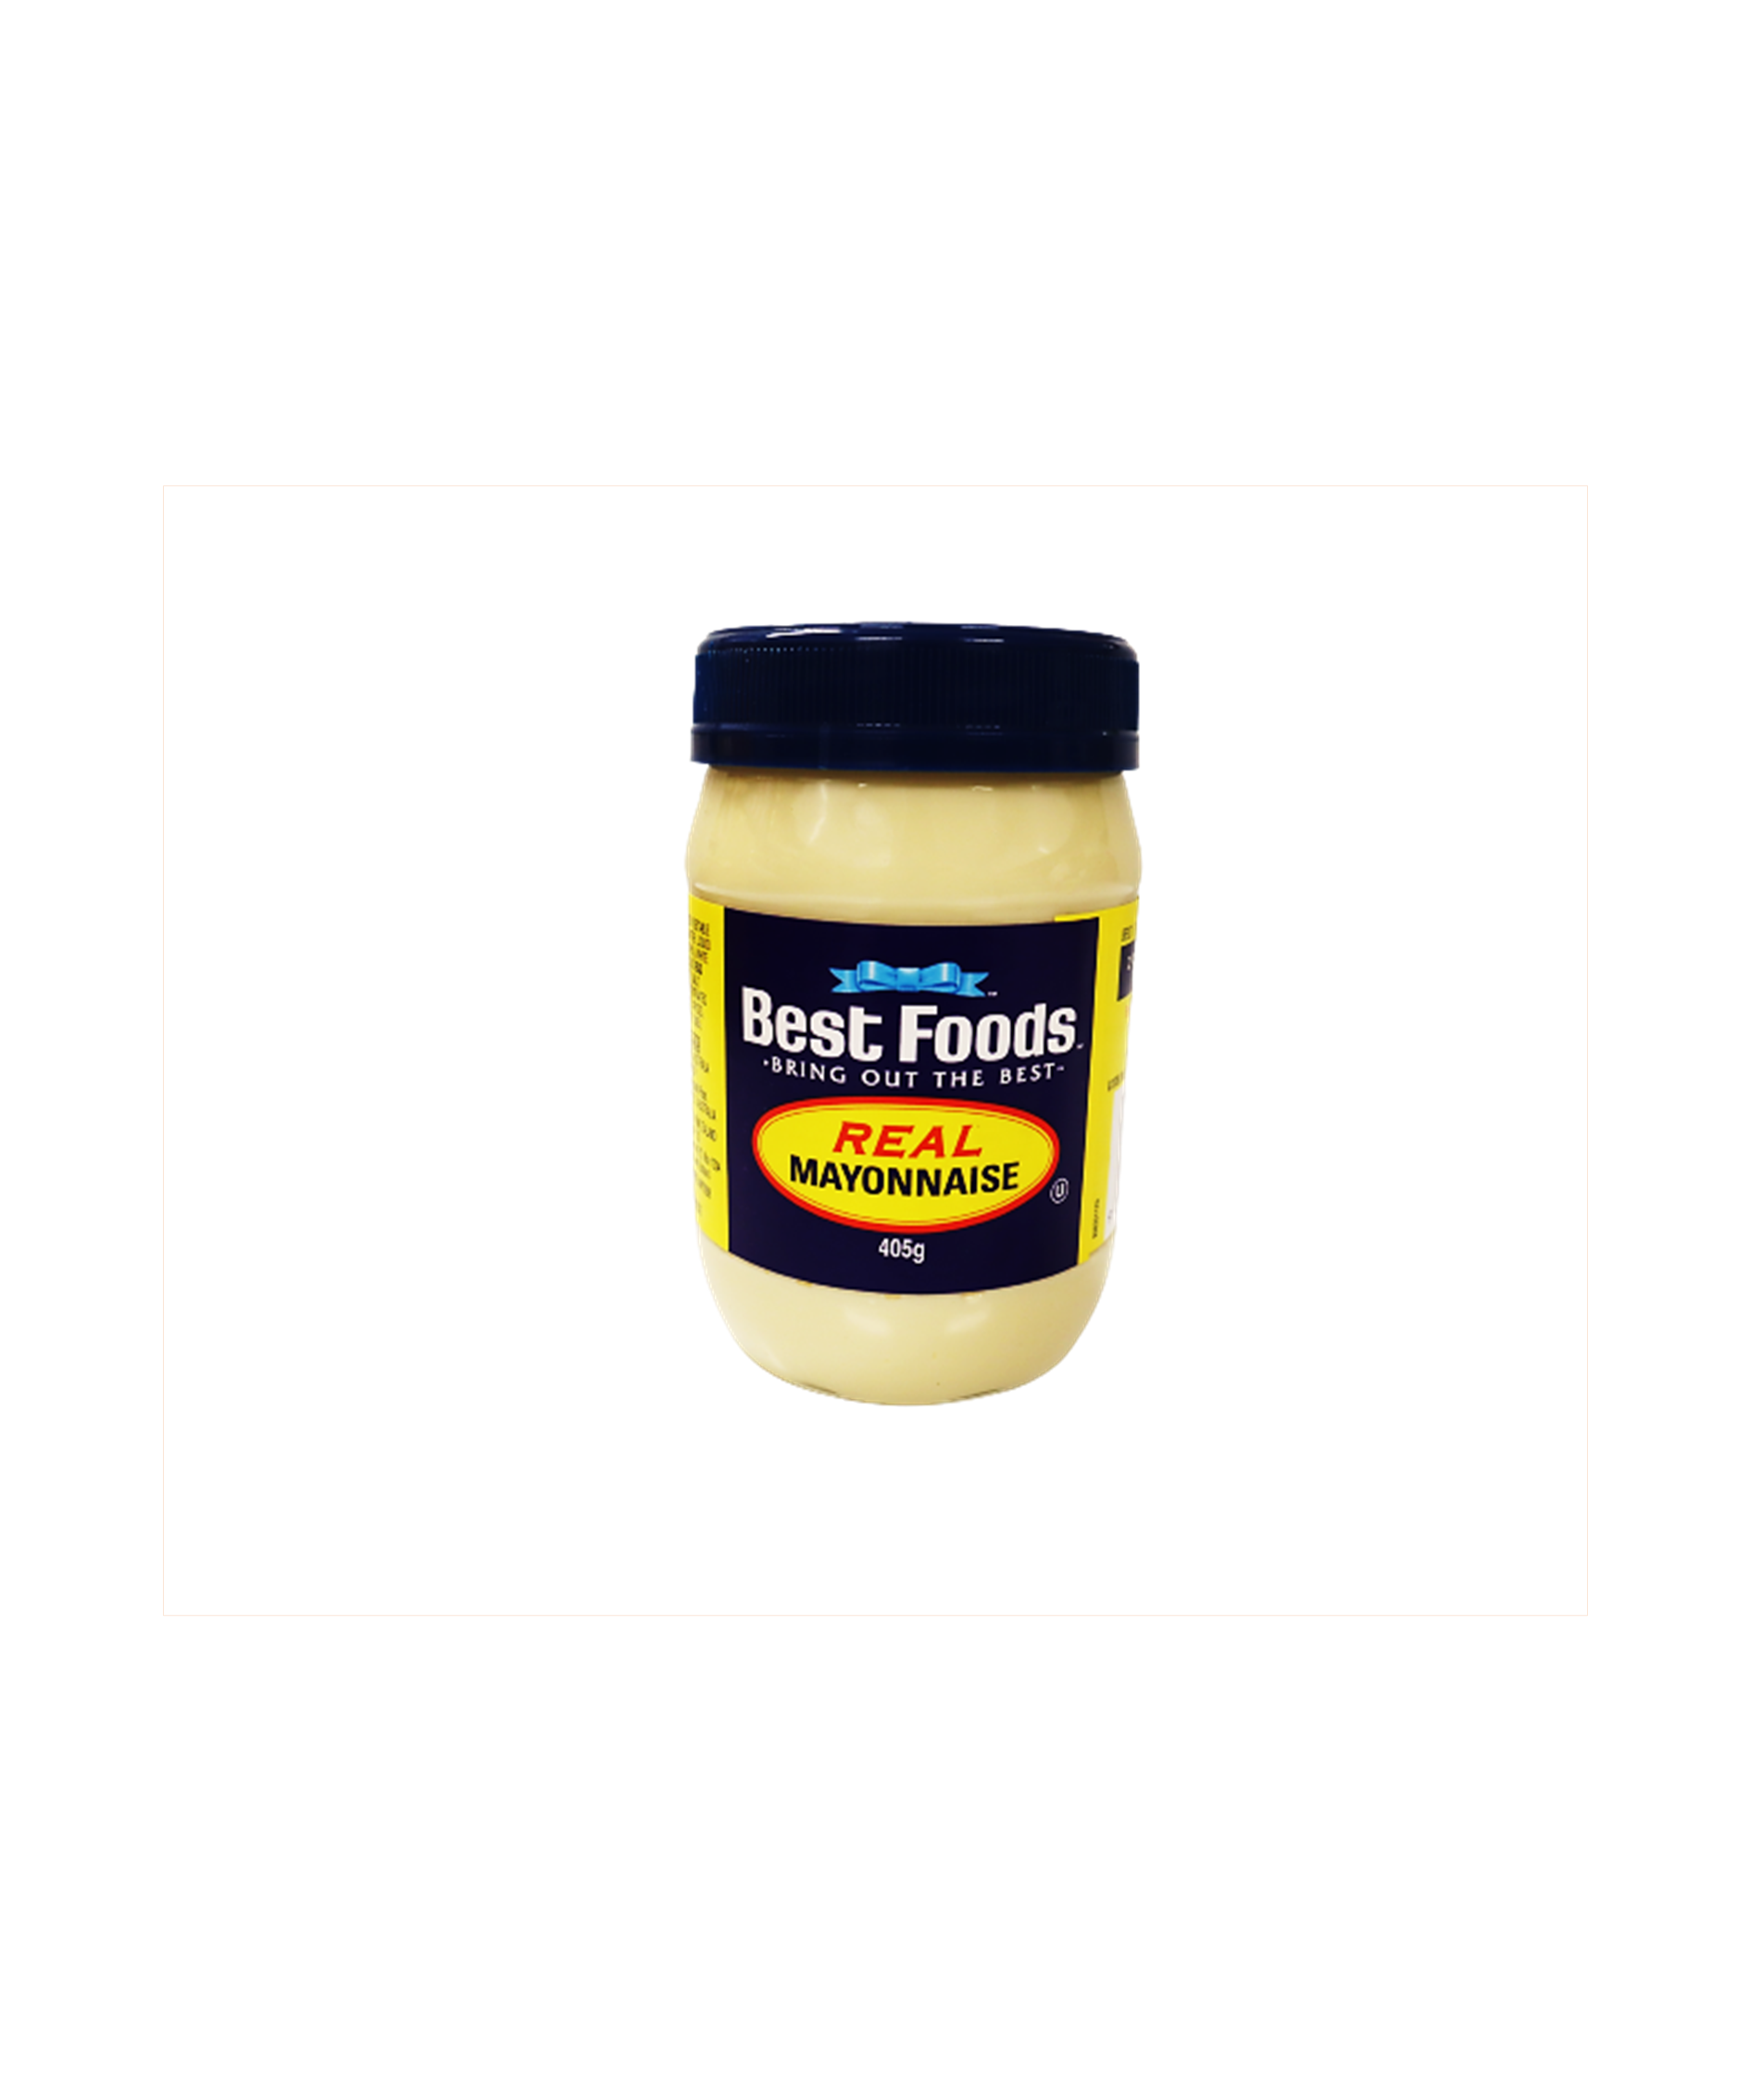 Best Foods Mayonnaise 405g